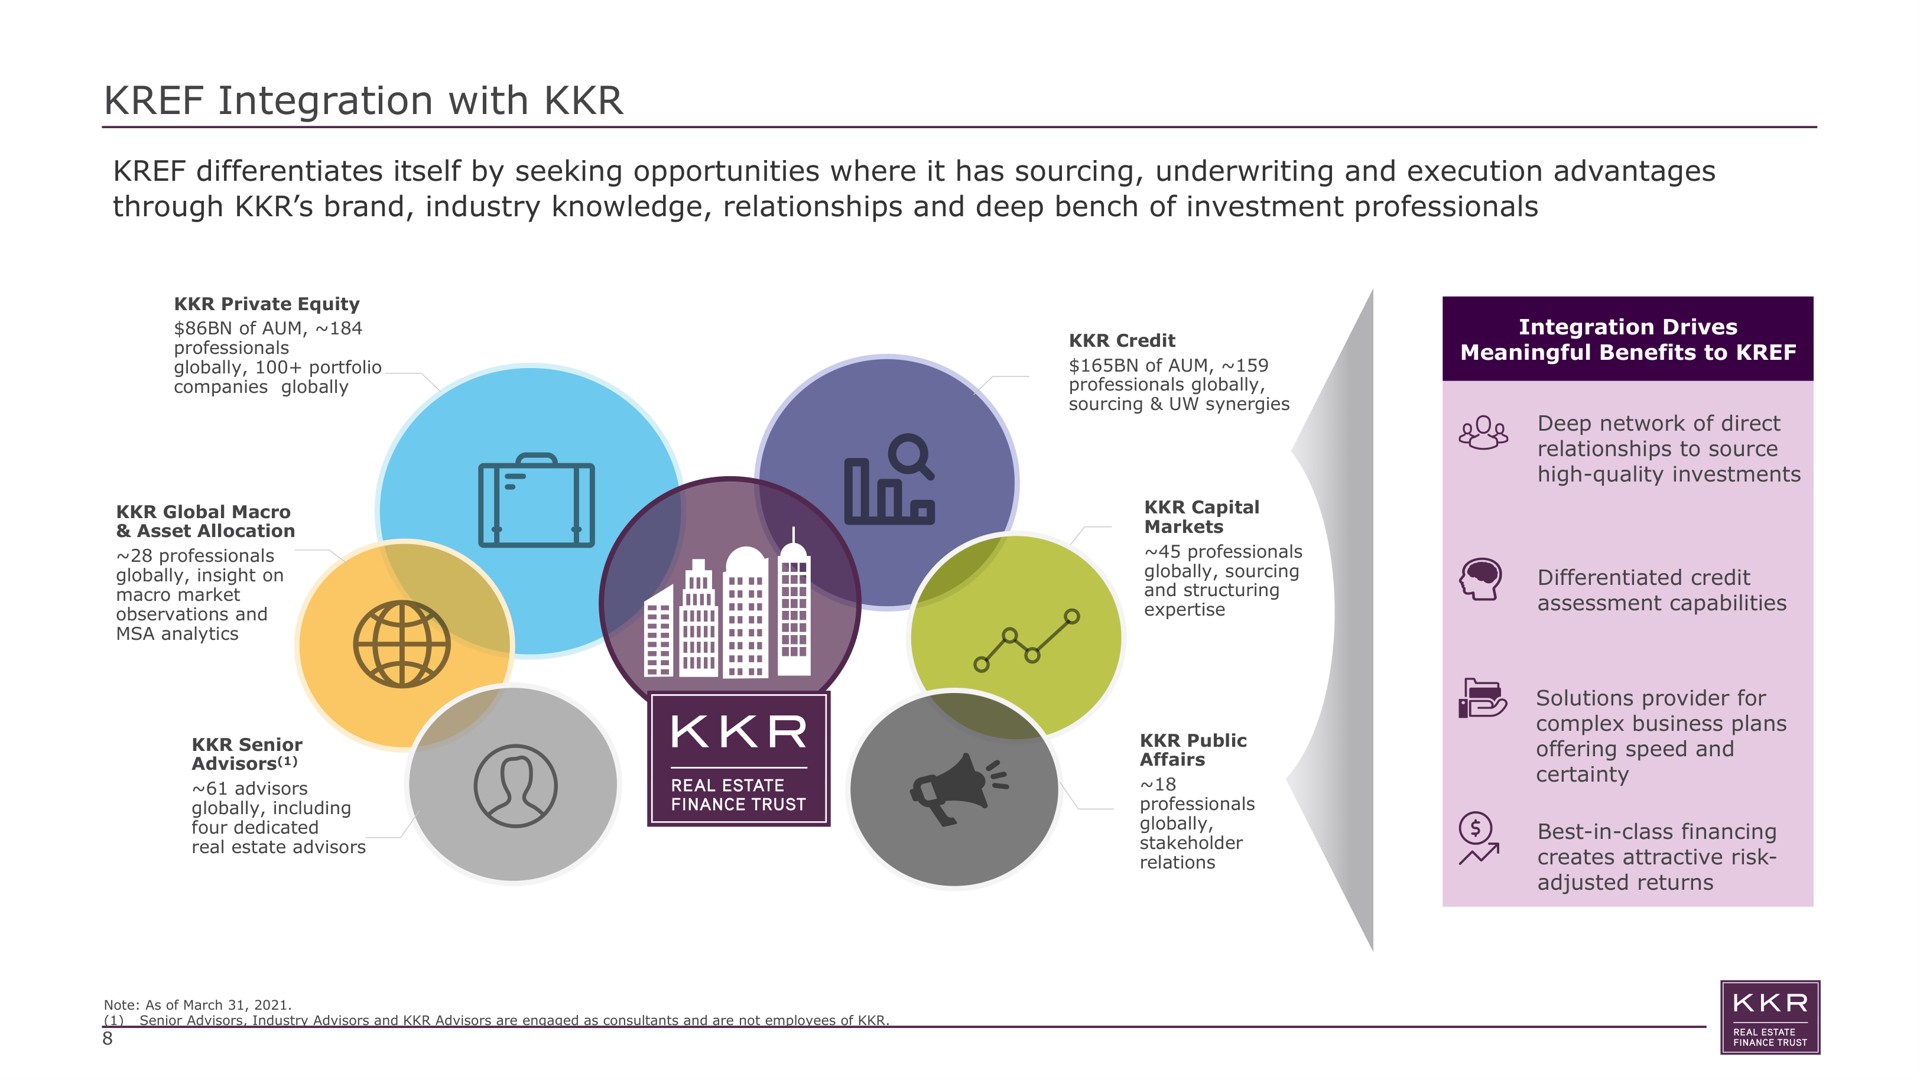 integration with differentiates itself by seeking opportunities where it has sourcing underwriting and execution advantages through brand industry knowledge relationships and deep bench of investment professionals | KKR Real Estate Finance Trust